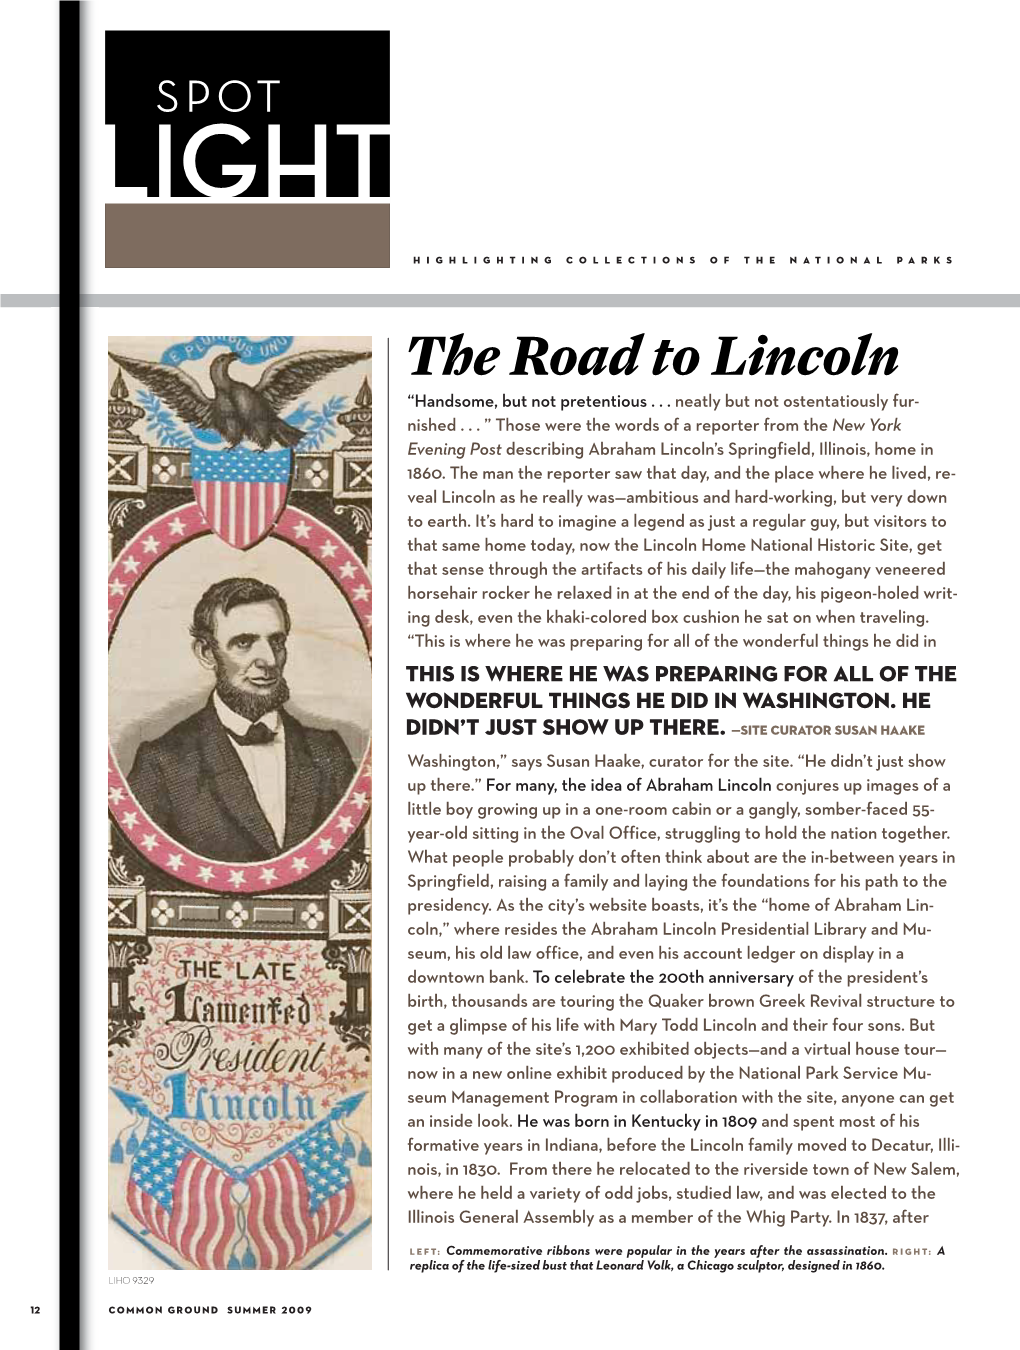 The Road to Lincoln